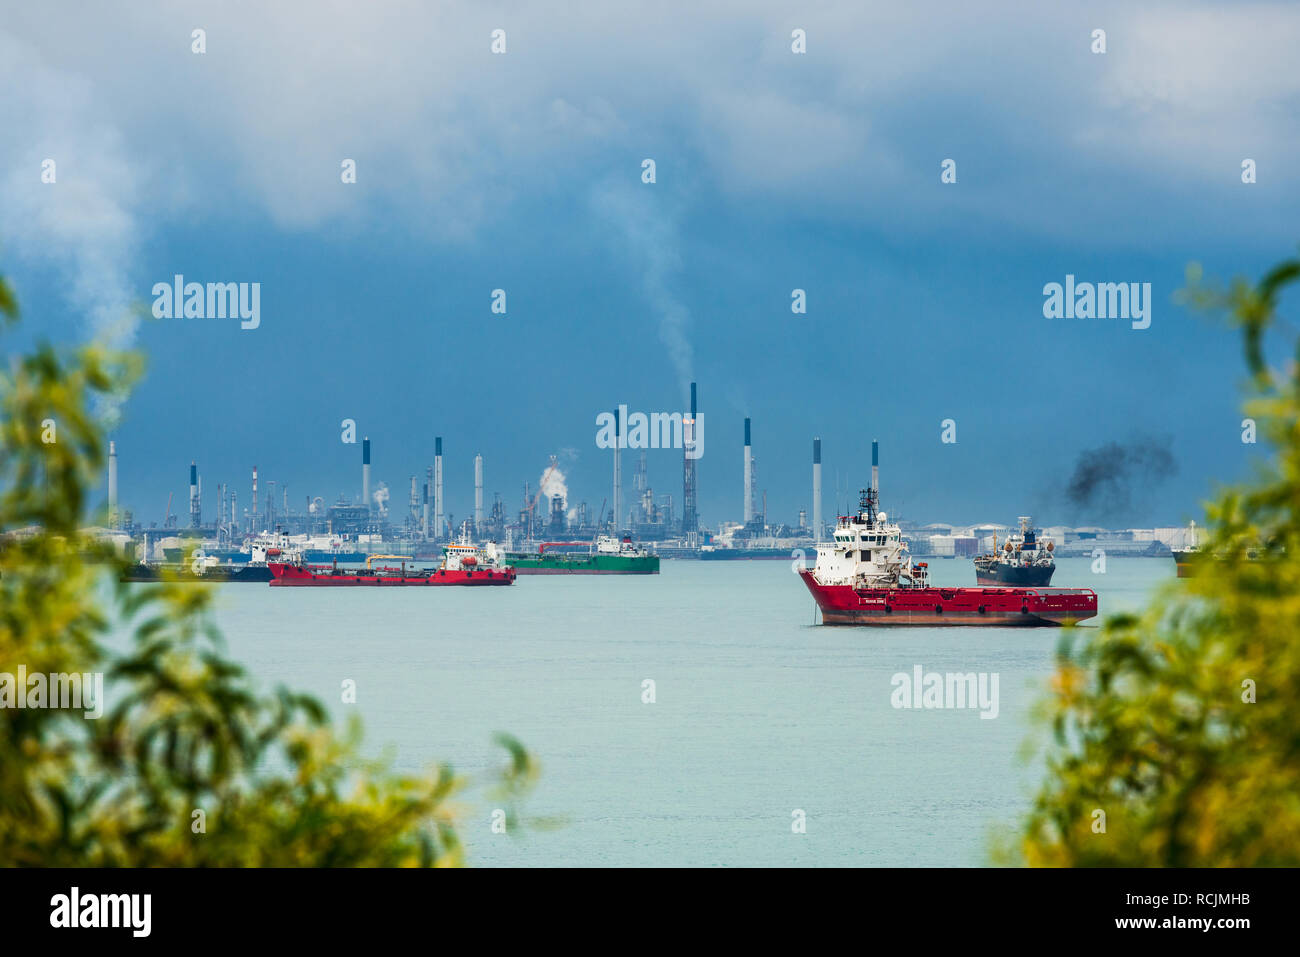 View of the Singapore Strait from Sentosa Island. Ships, industrial landscape and stormy weather. Stock Photo